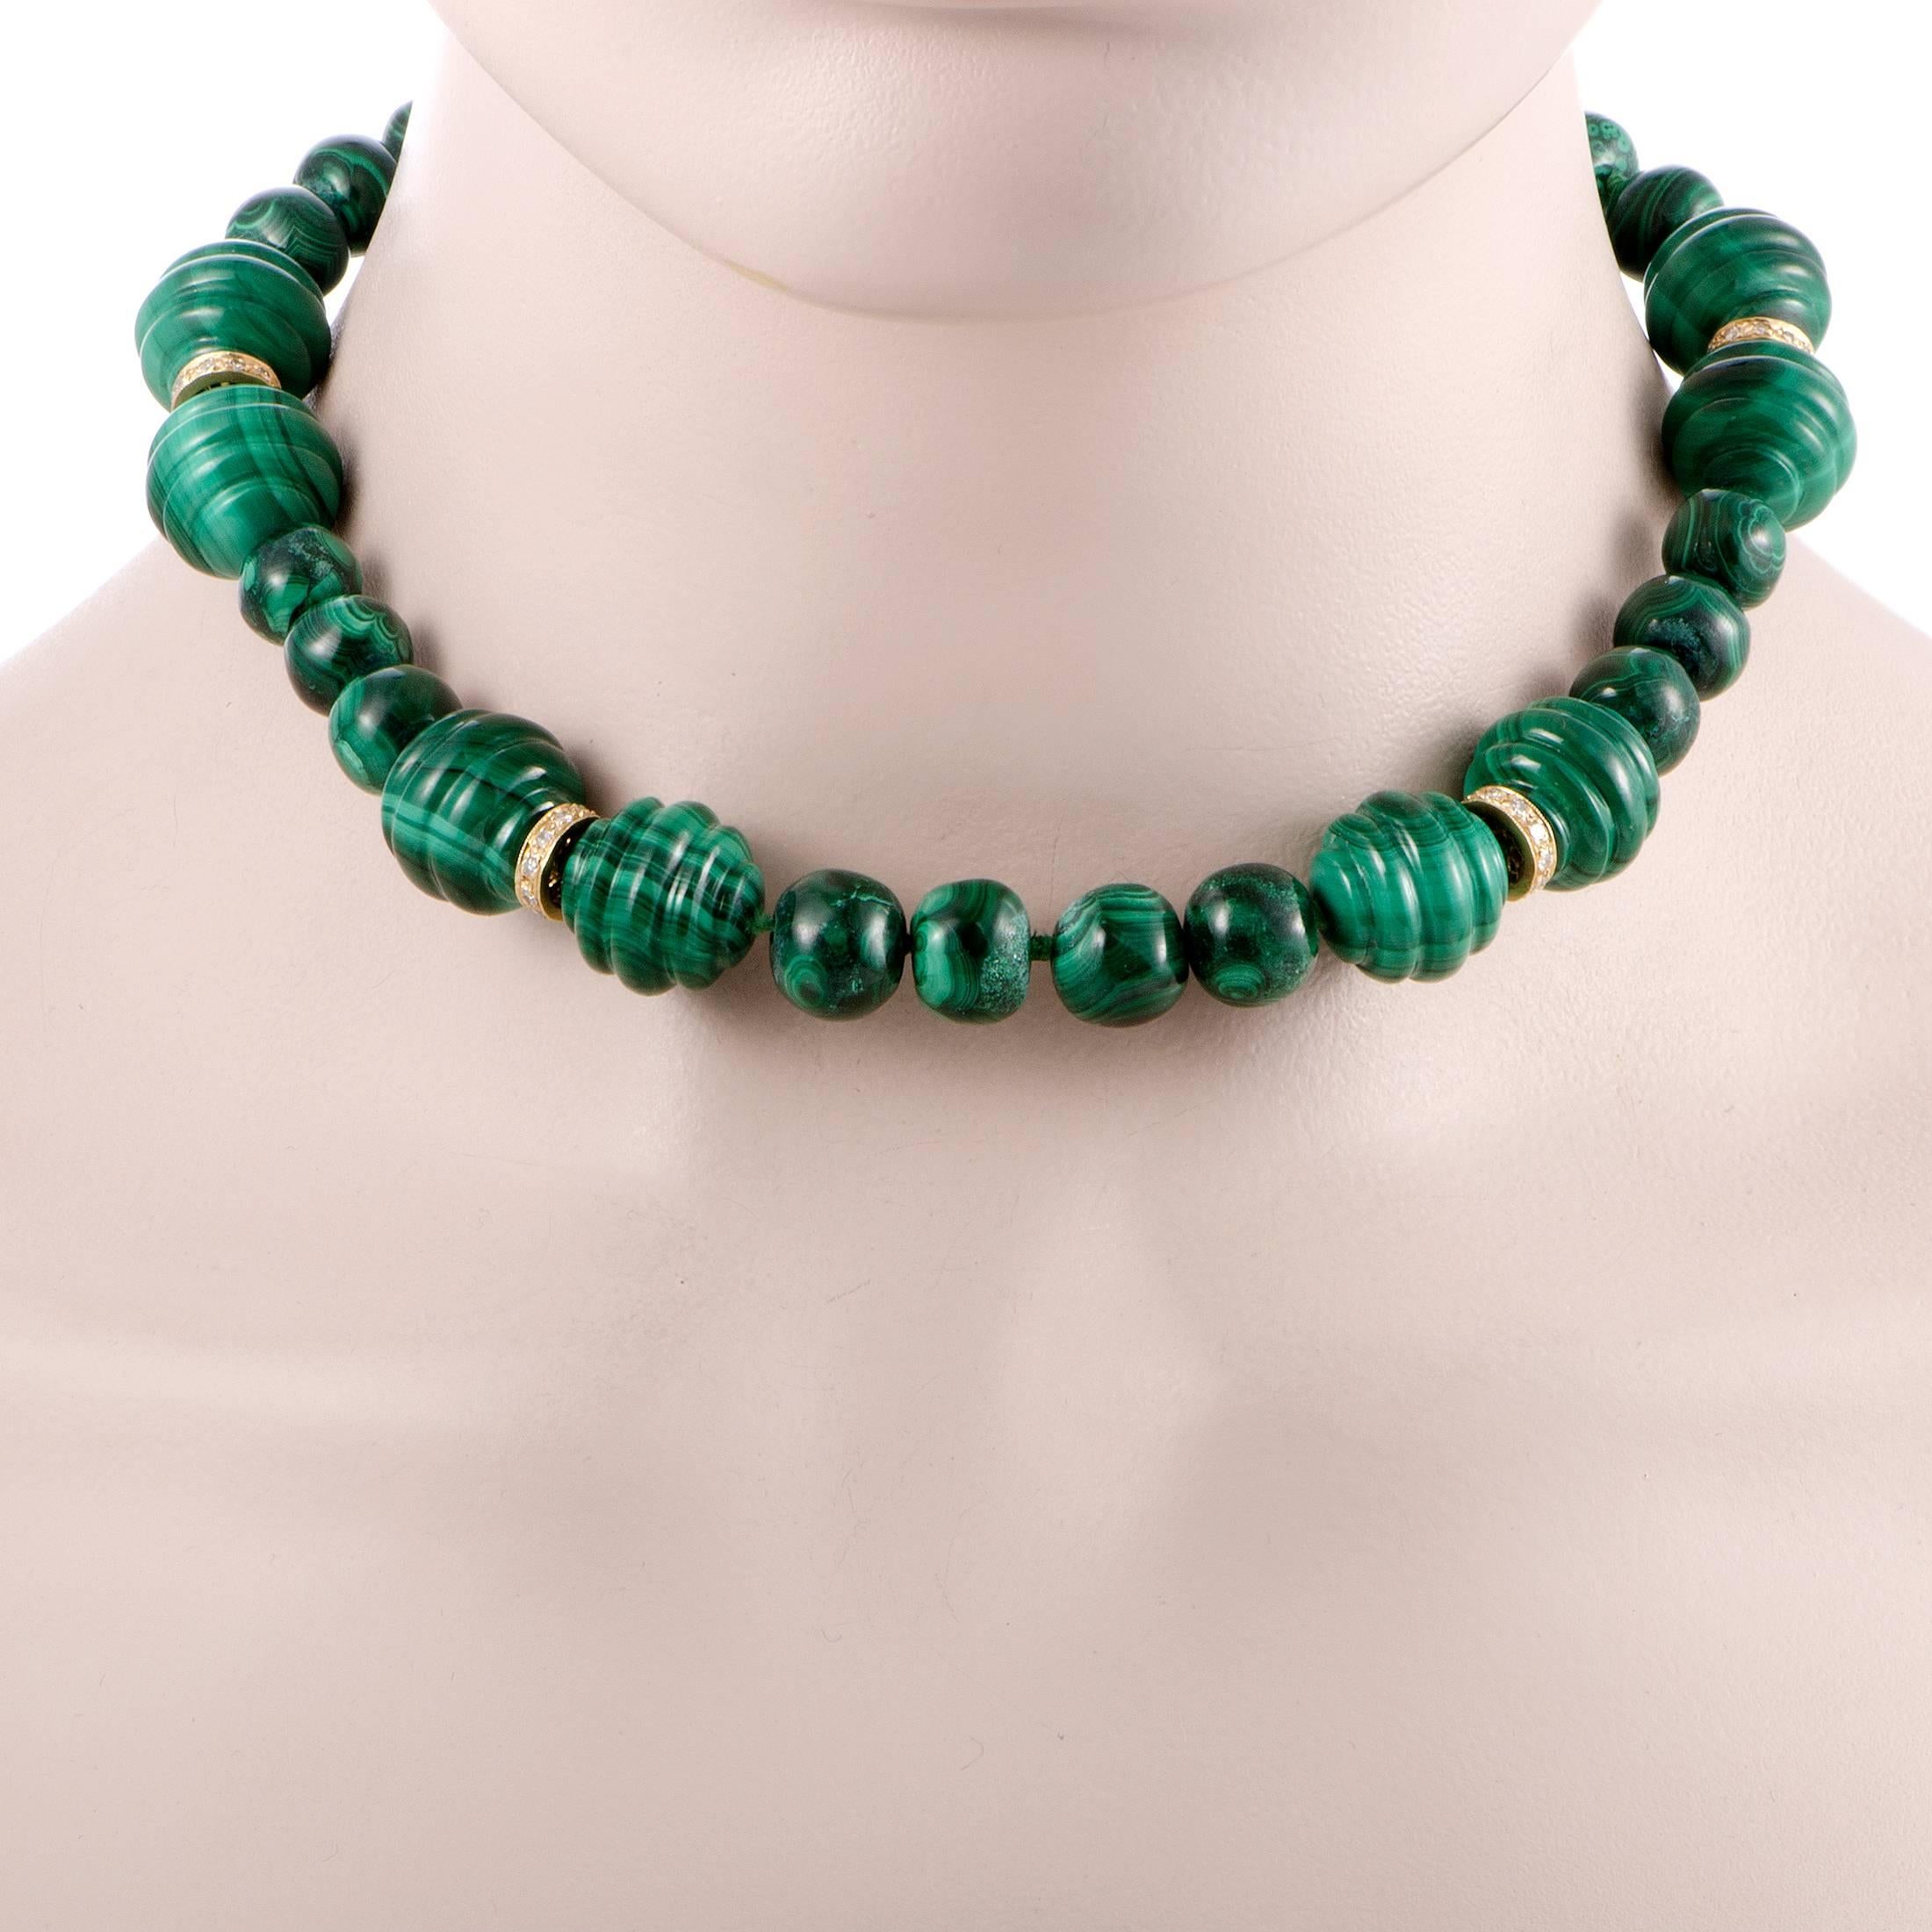 Instantly elevate your ensemble with the tonal green hues of this malachite necklace, accented with 18K yellow gold bejeweled embellishments. The 0.50 carats of diamonds add a dose of sparkling flair and sophistication to your look.
